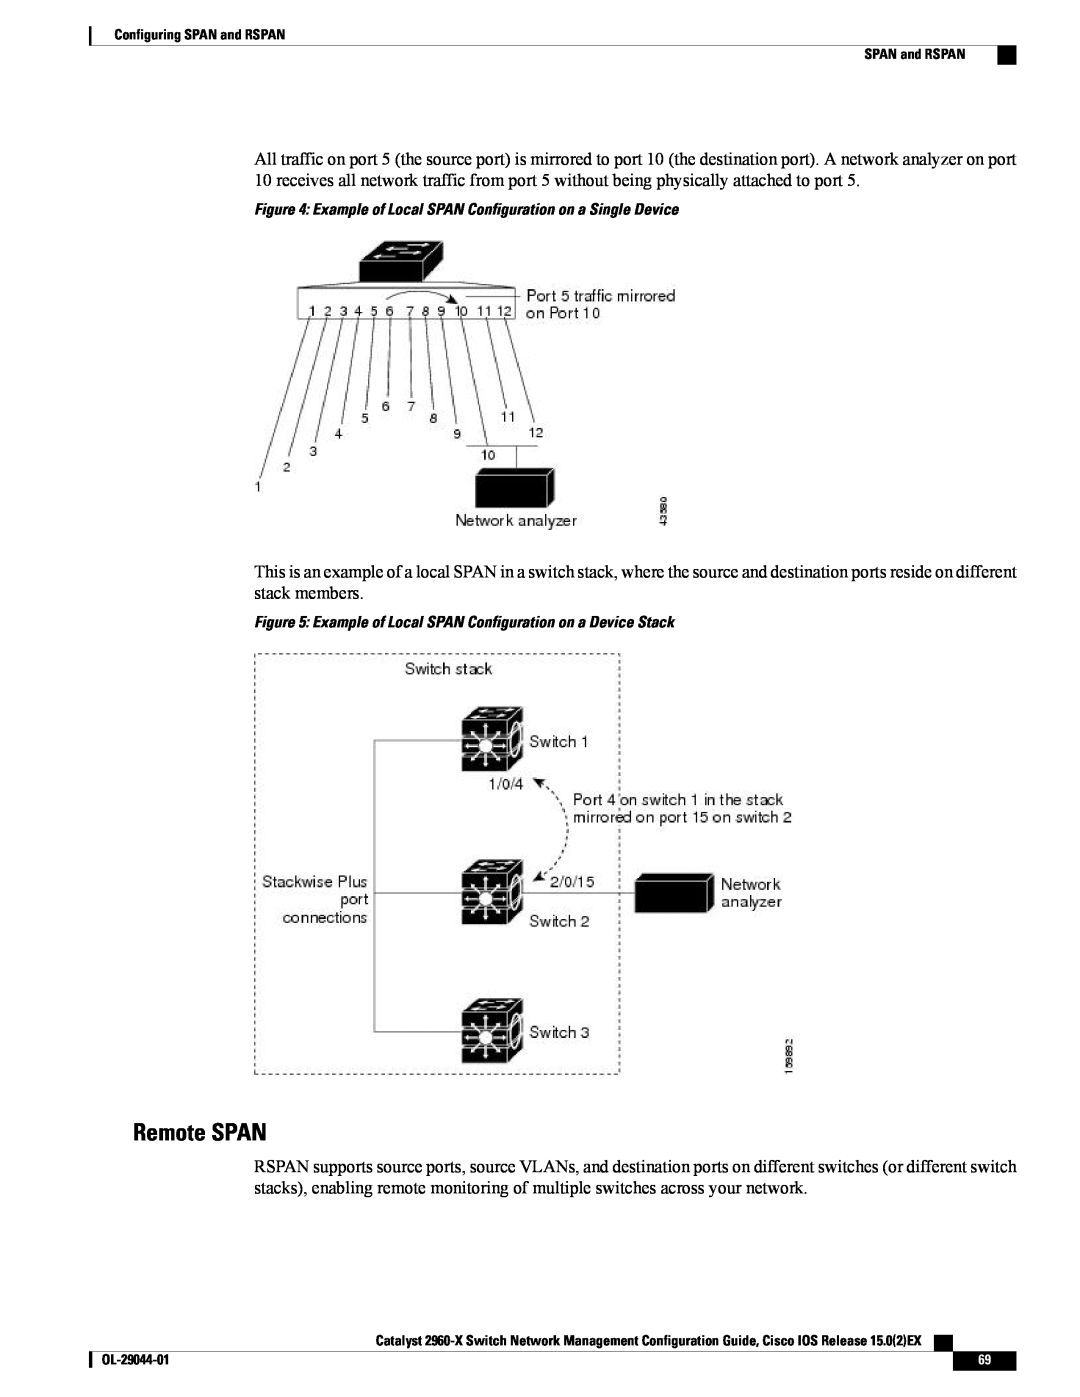 Cisco Systems WSC2960X24PDL, WSC2960X24TDL, C2960XSTACK Remote SPAN, Example of Local SPAN Configuration on a Single Device 